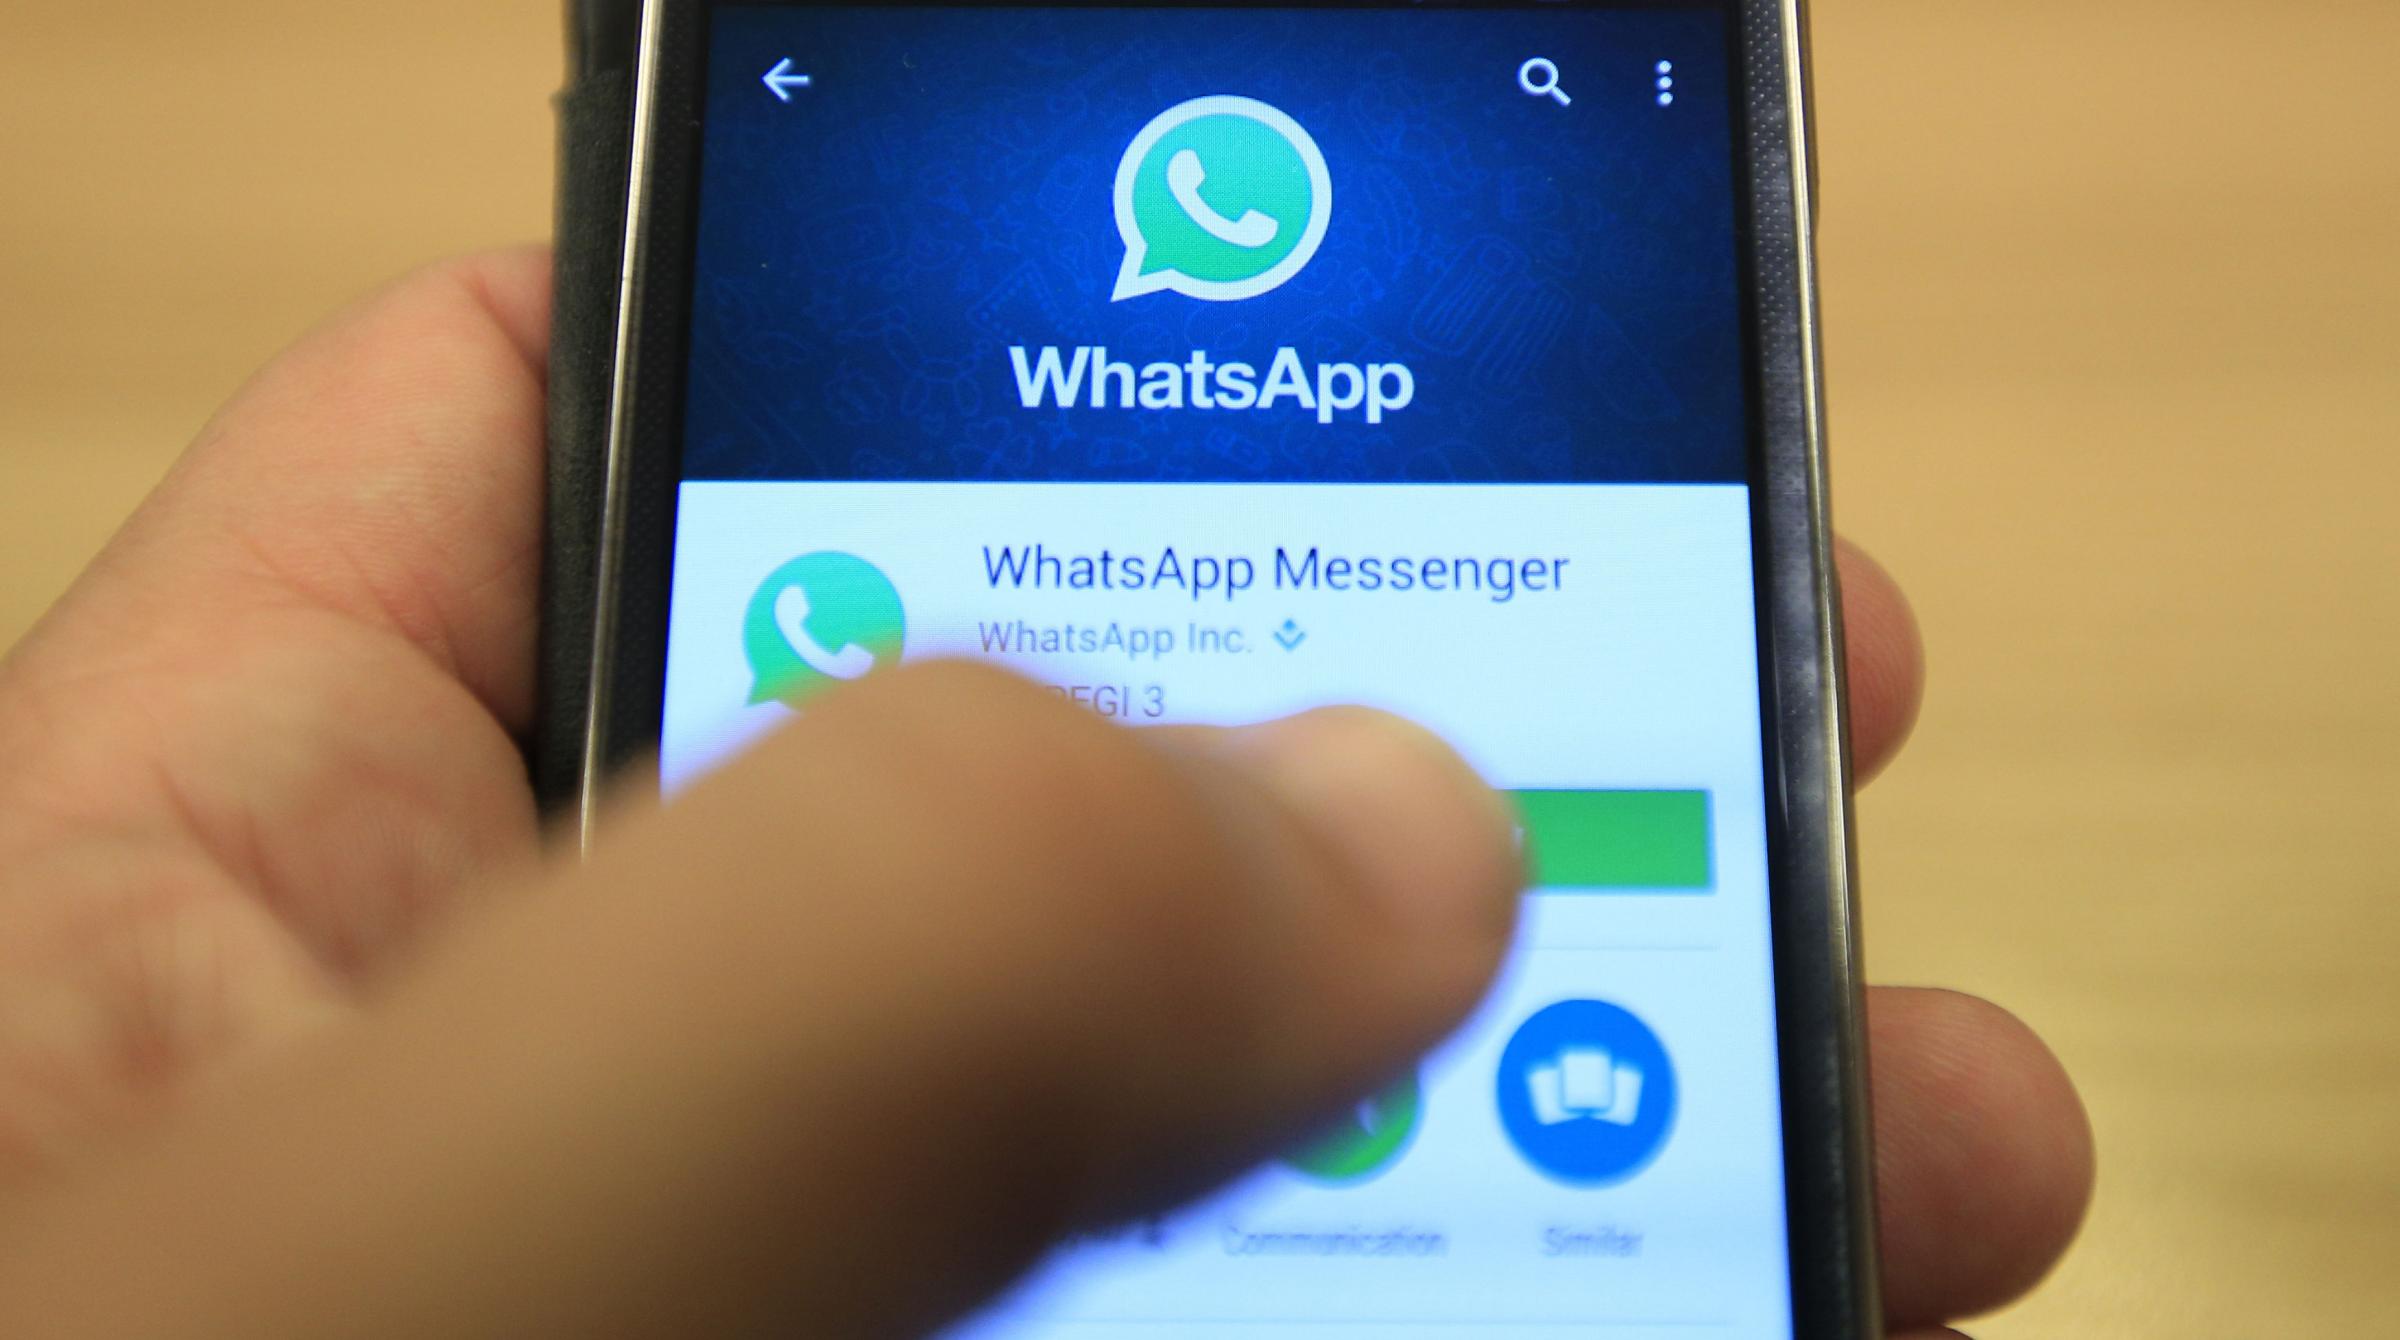 Theresa May: WhatsApp must not be 'secret place' for terrorists